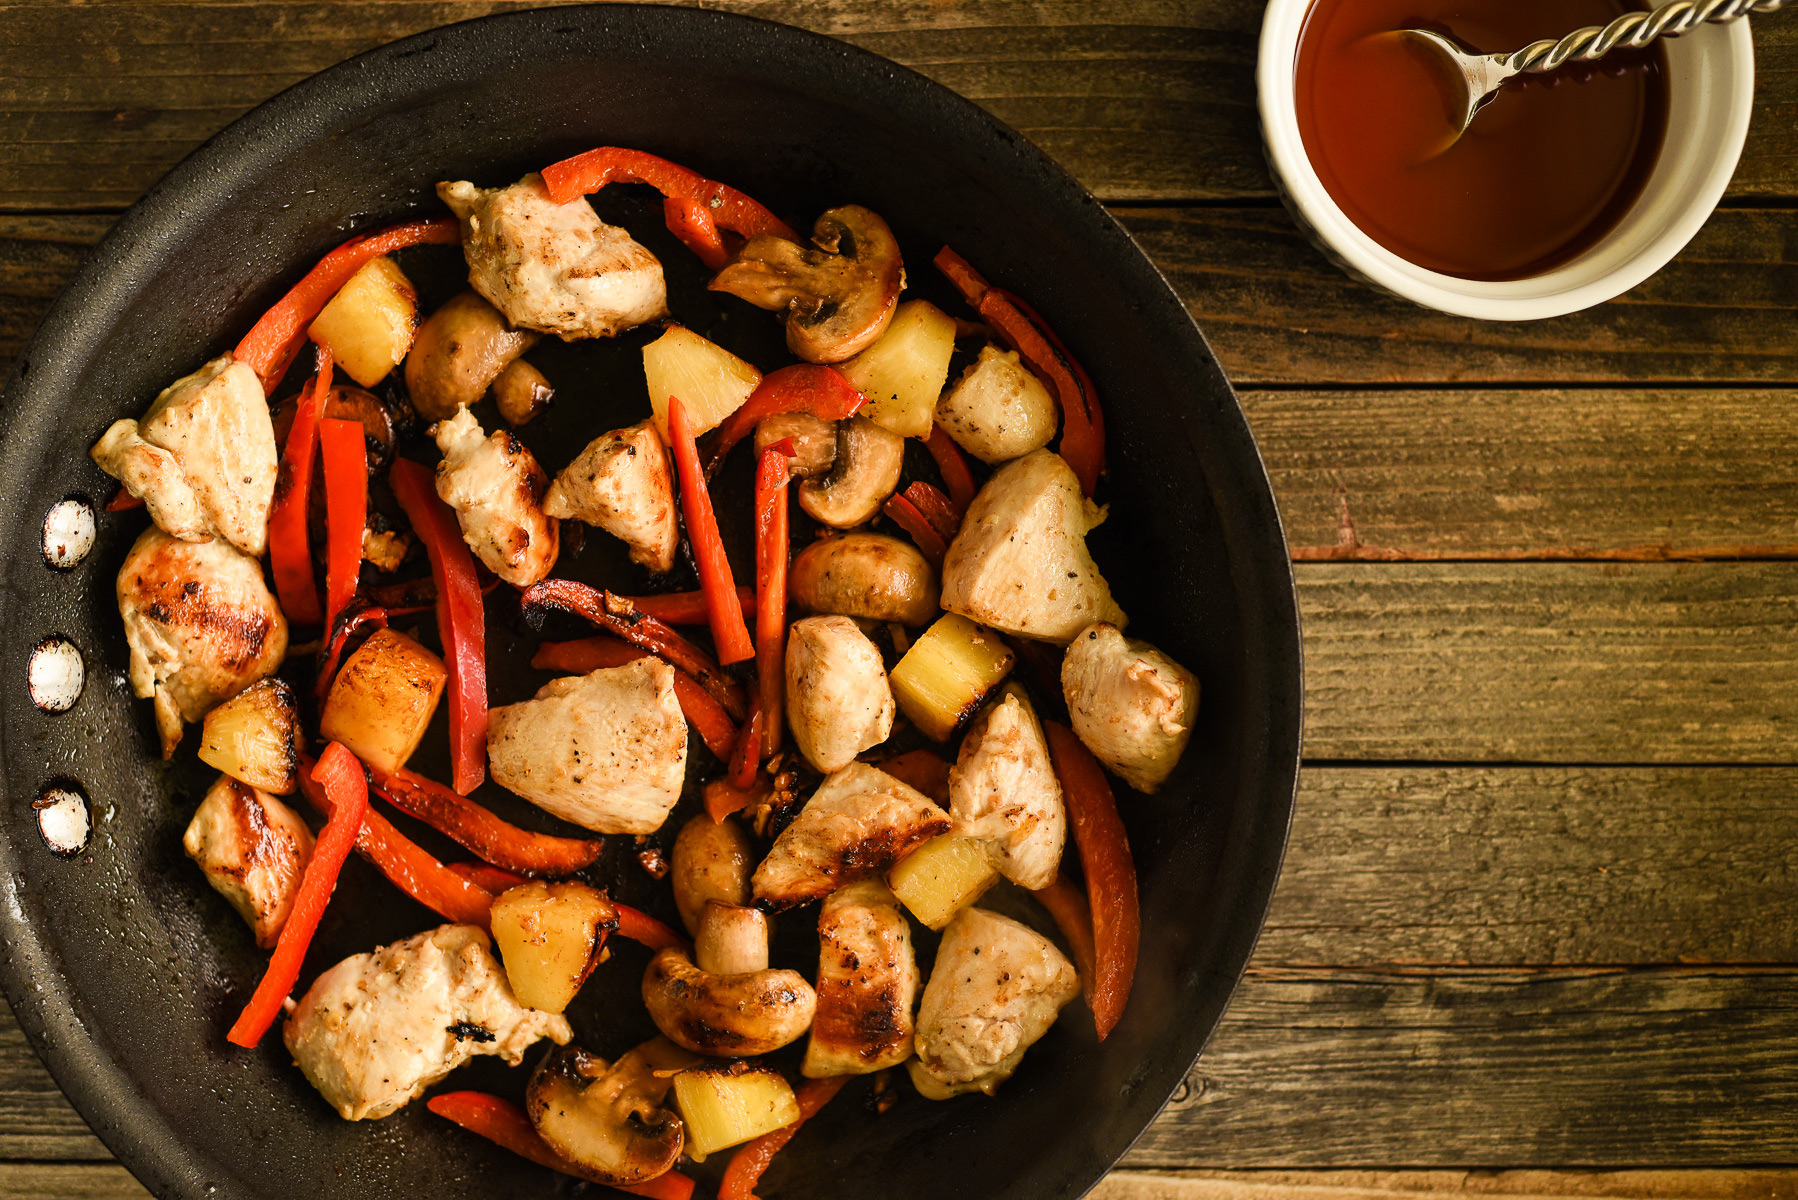 Chopped chicken, pepper, mushroom and pineapple, stir-fried in a skillet